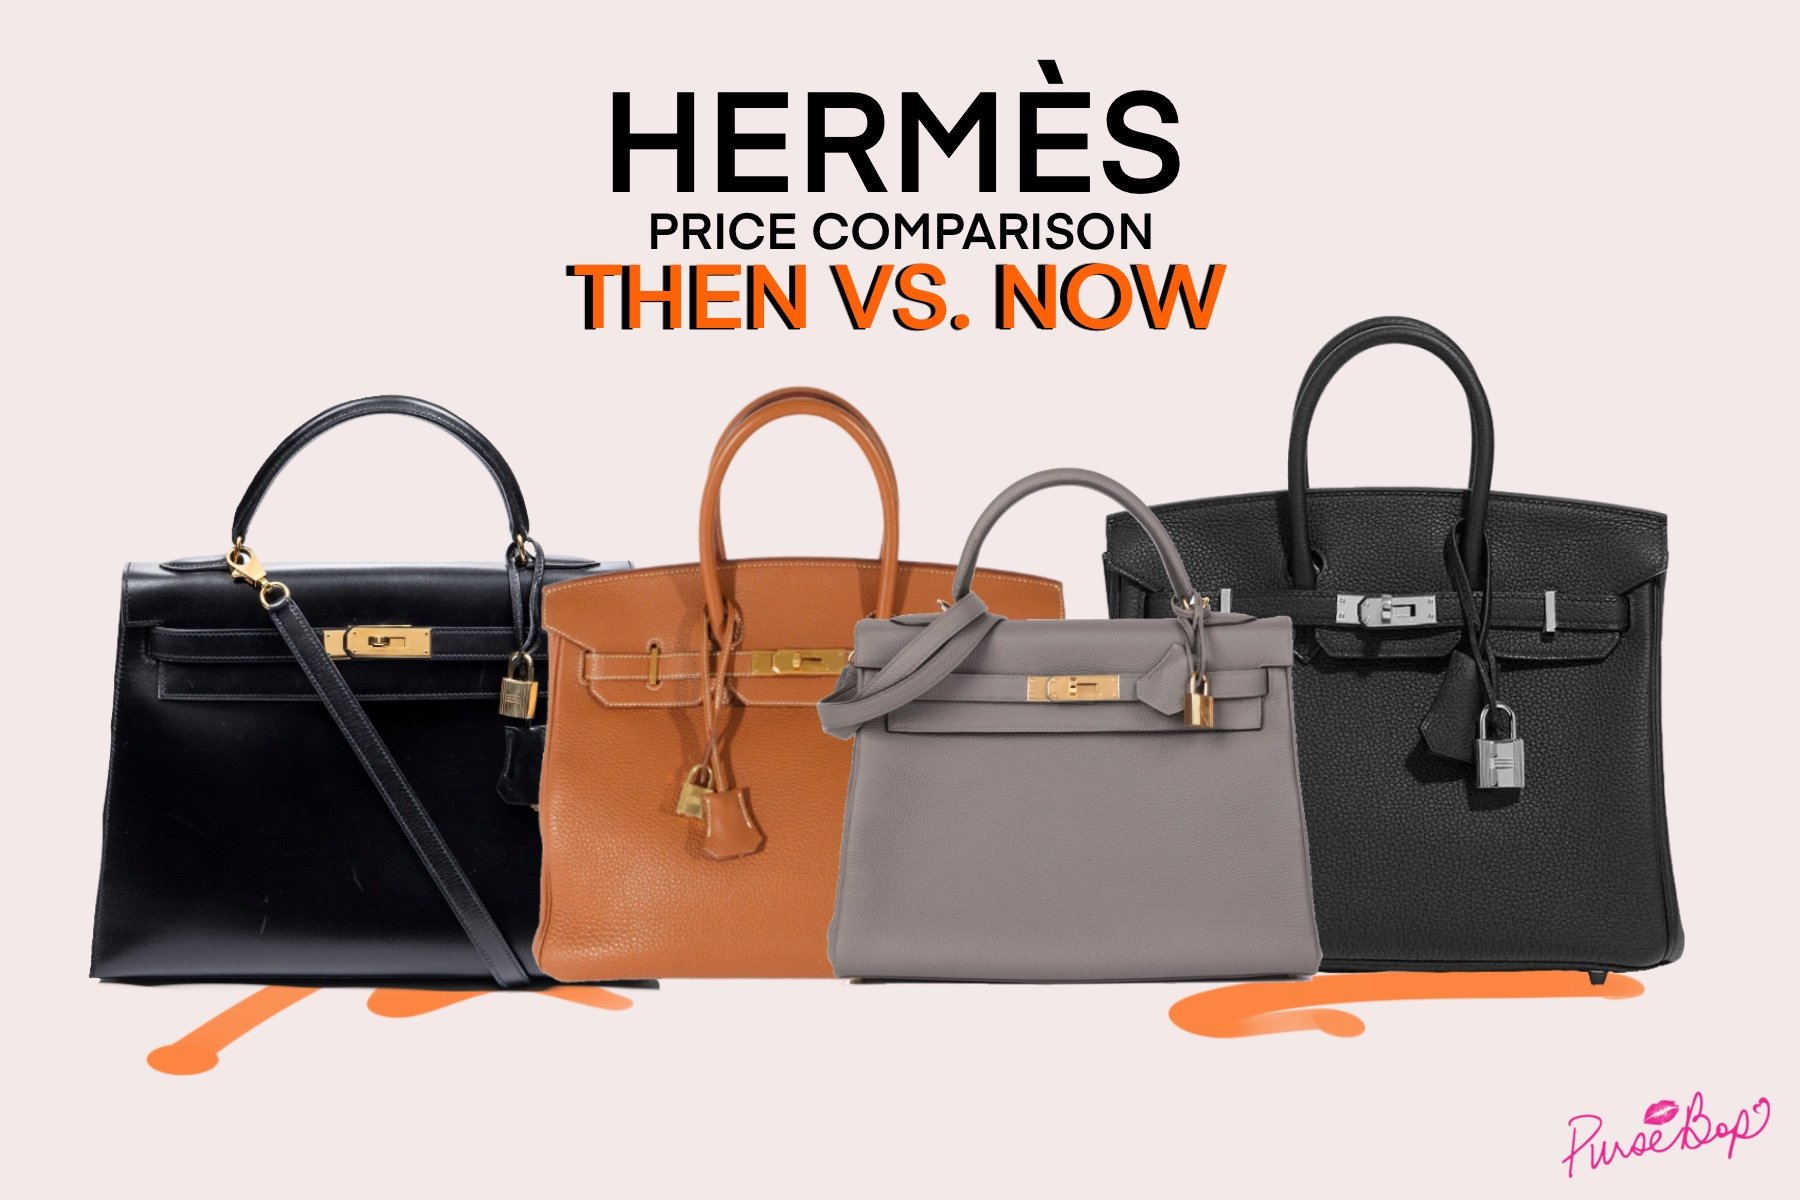 Hermes Birkin bag will become more expensive from 2023